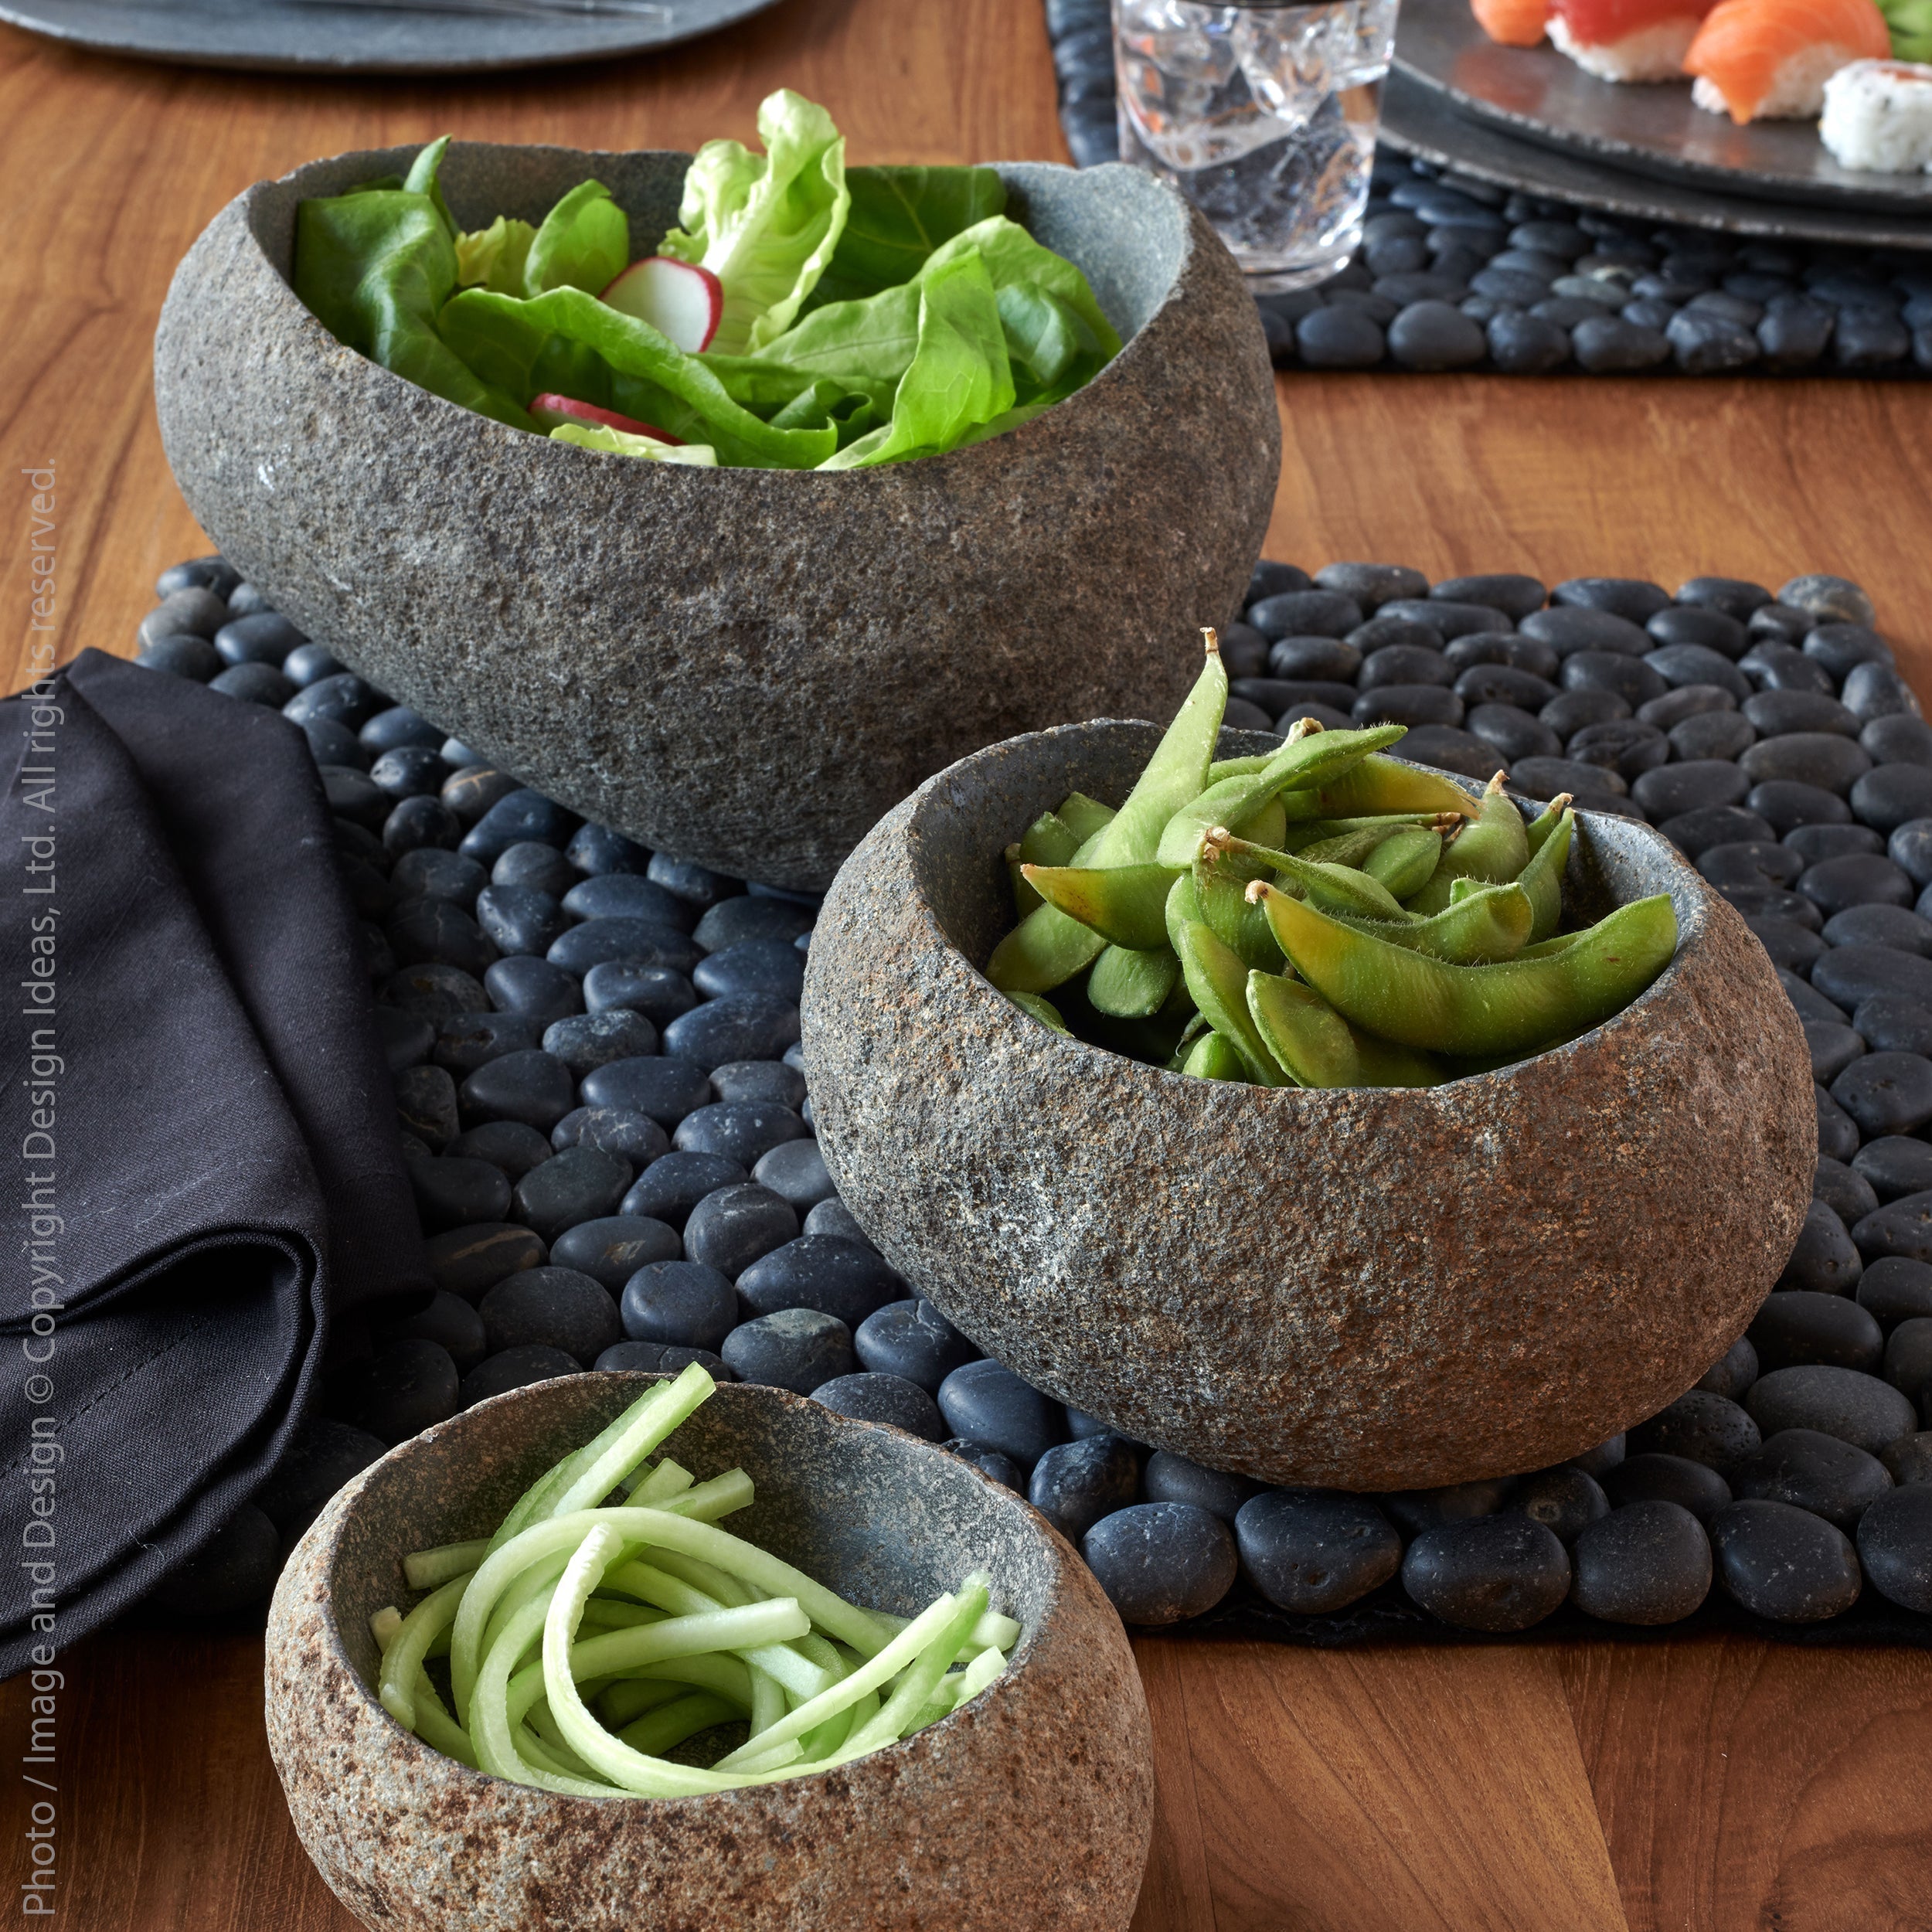 Stoneshard™ bowl (7.9 x 8.7 x 4.3 in.) - Gray | Image 4 | Premium Bowl from the Stoneshard collection | made with Riverstone for long lasting use | texxture